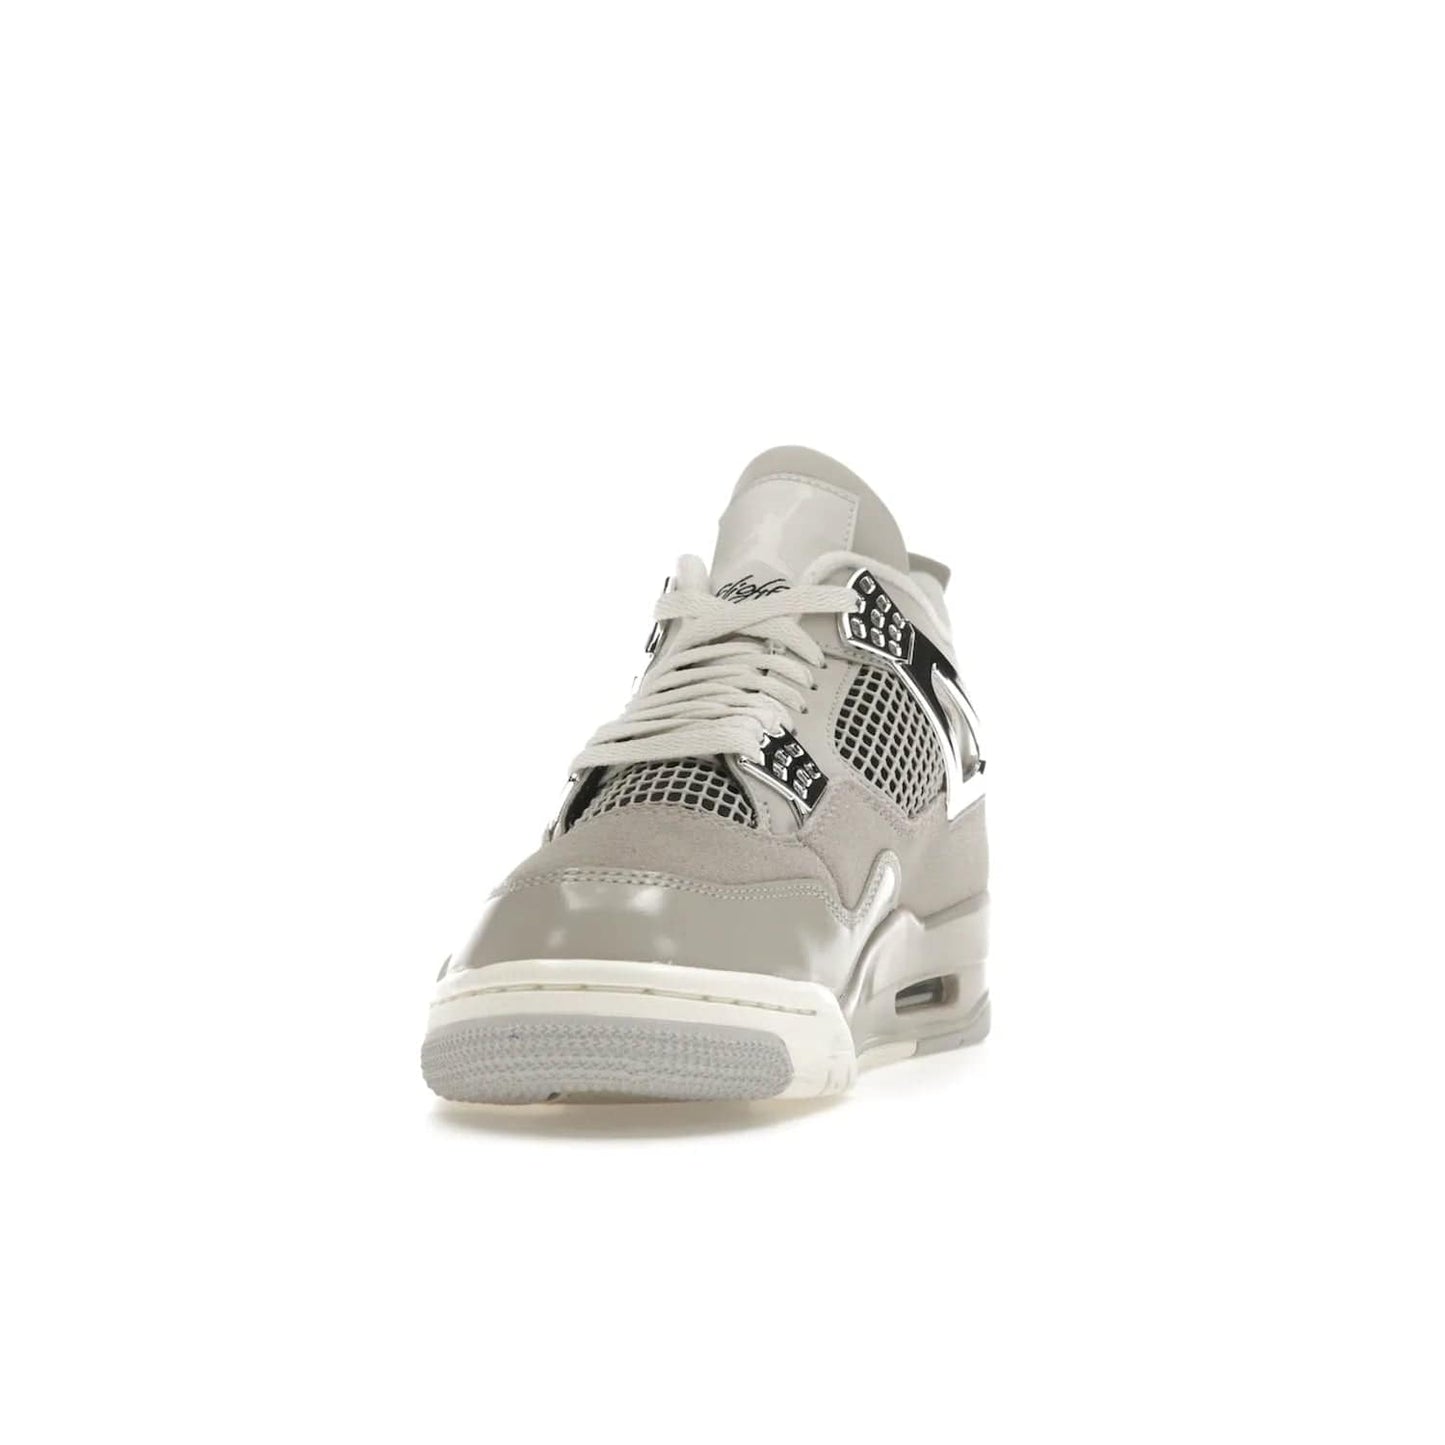 Jordan 4 Retro Frozen Moments (Women's) - Image 12 - Only at www.BallersClubKickz.com - The Jordan 4 Retro Frozen Moments is a stylish blend of classic design elements and modern tones. Featuring suede and leather overlays in a light iron-ore, sail, neutral grey, black, and metallic silver colorway. Get this iconic high-performance sneaker for $210.